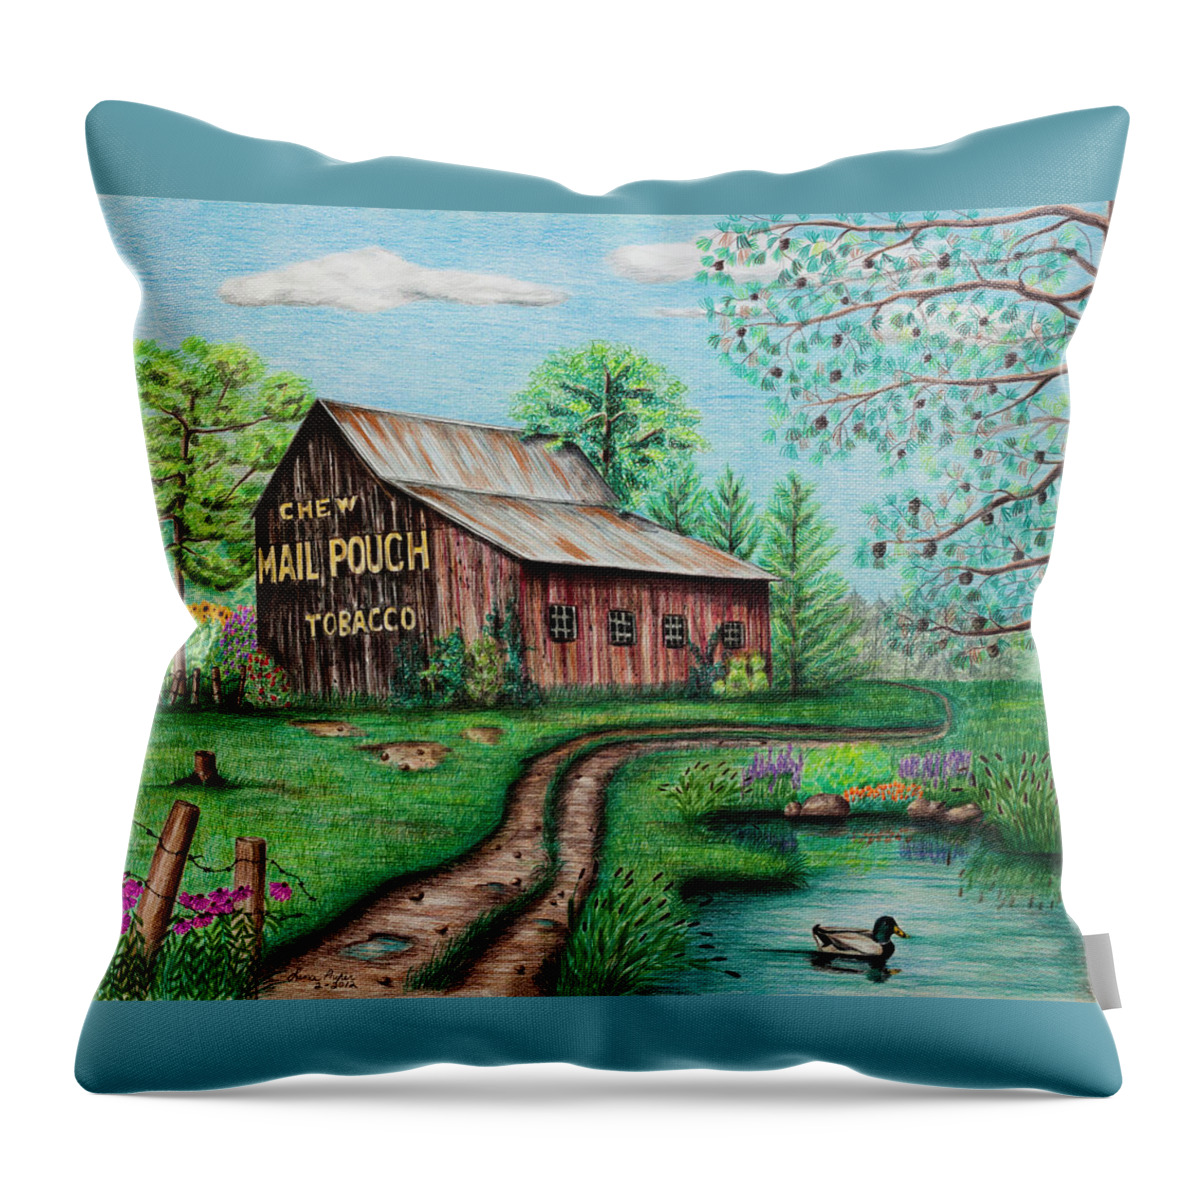 Mail Pouch Throw Pillow featuring the drawing Mail Pouch Tobacco Barn by Lena Auxier